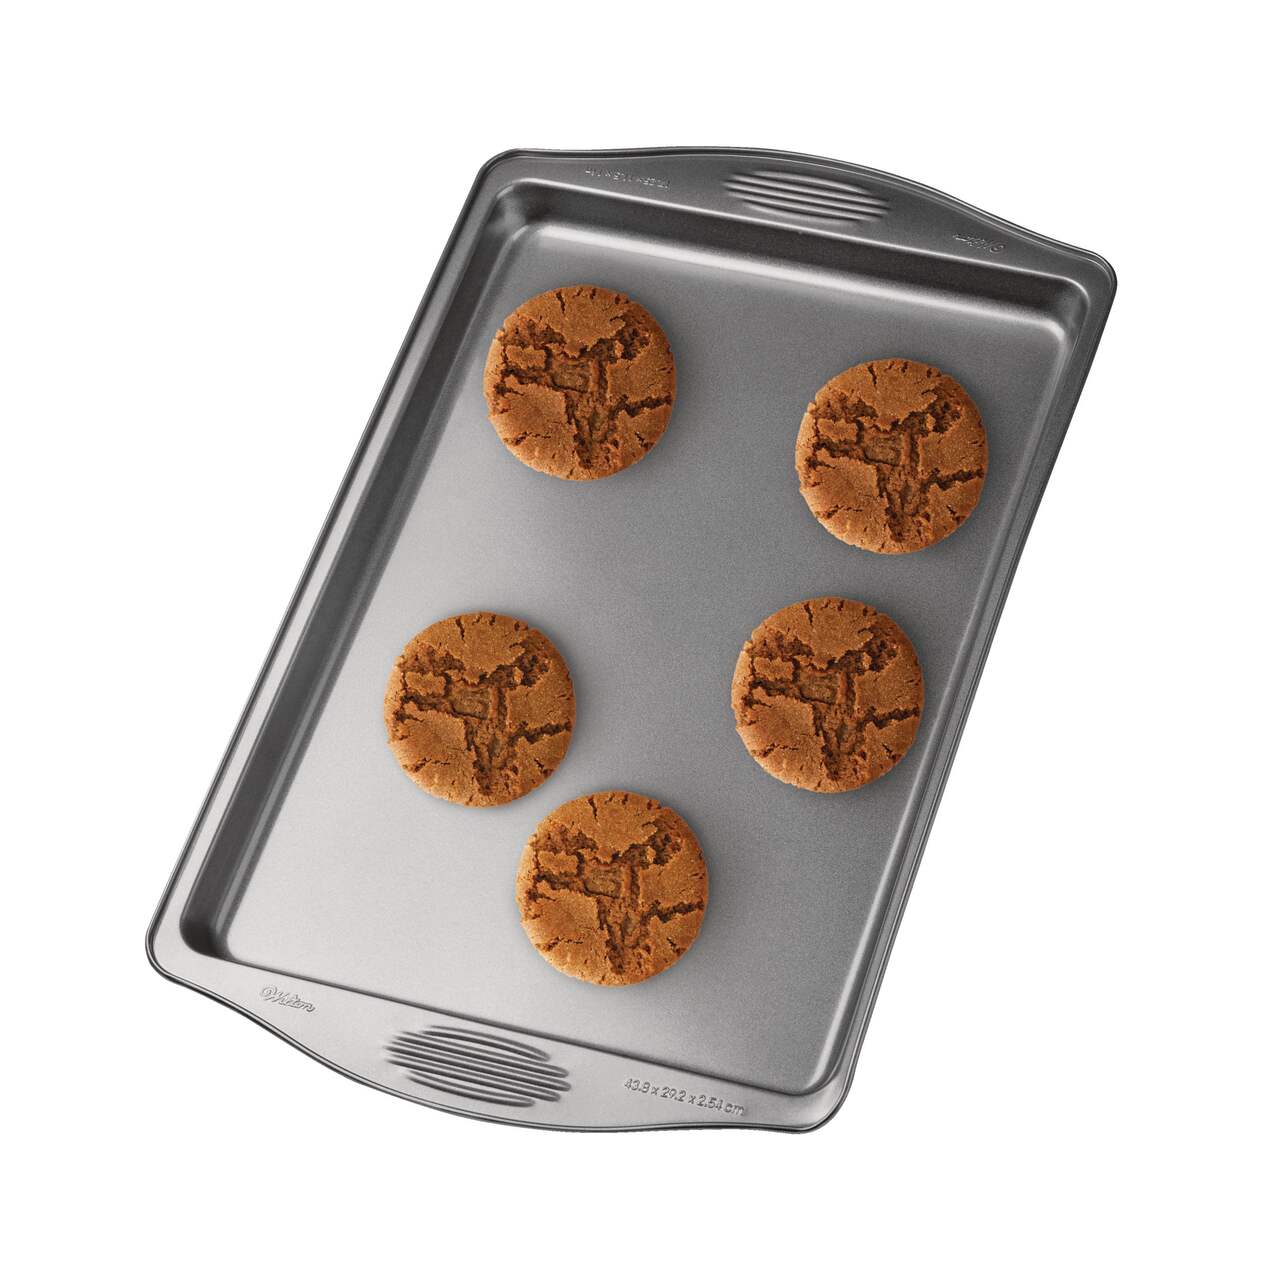 https://media-www.canadiantire.ca/product/living/kitchen/bakeware-baking-prep/0420544/wilton-gourmet-choice-cookie-large-2cb0e4d3-1d75-4246-a788-5df0ff1afd7c-jpgrendition.jpg?imdensity=1&imwidth=1244&impolicy=mZoom